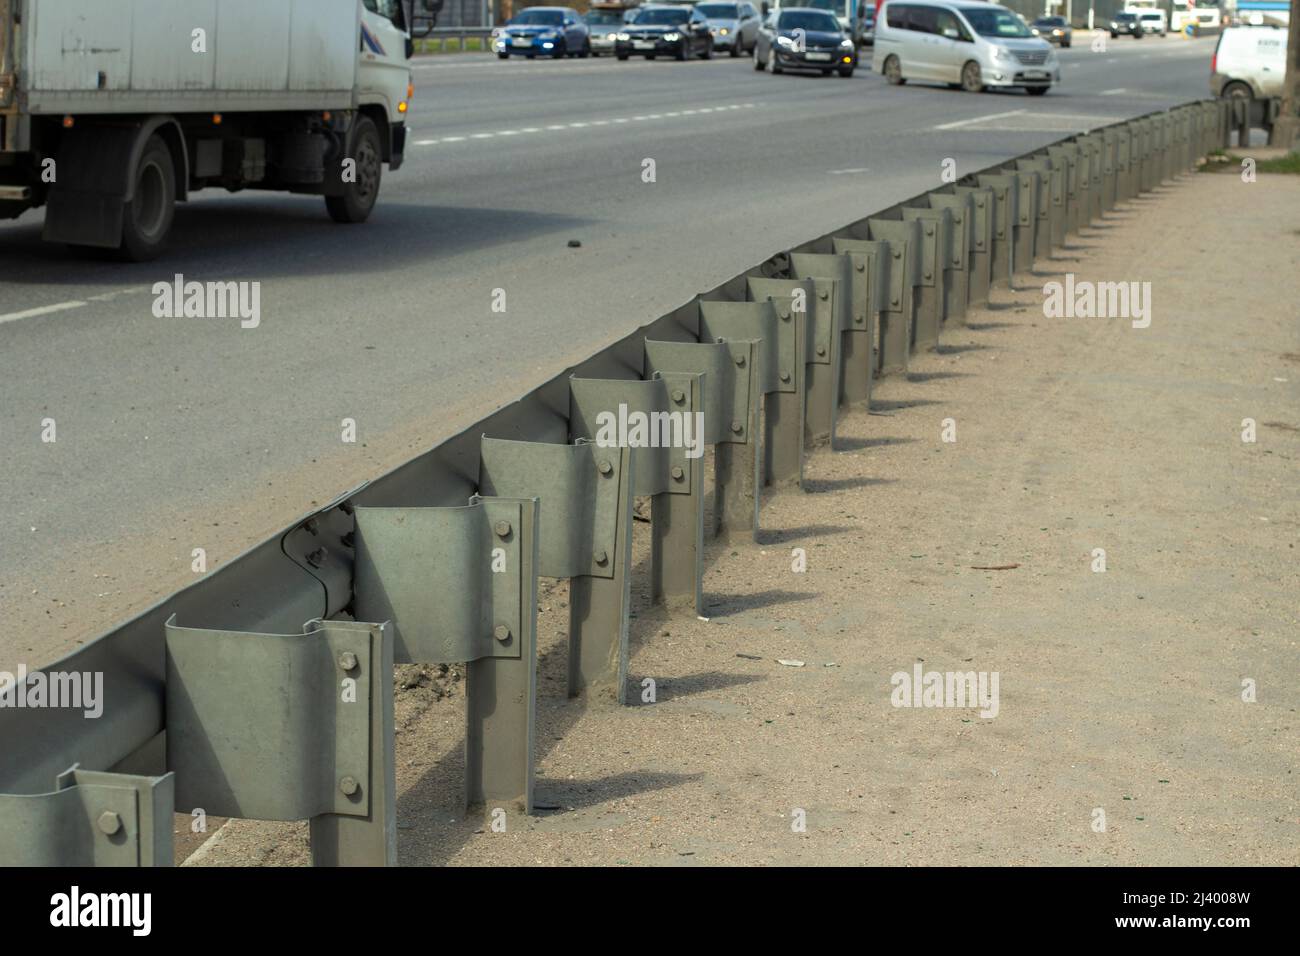 Road bumper. Obstruction on the side of the road. Highway safety. Stock Photo